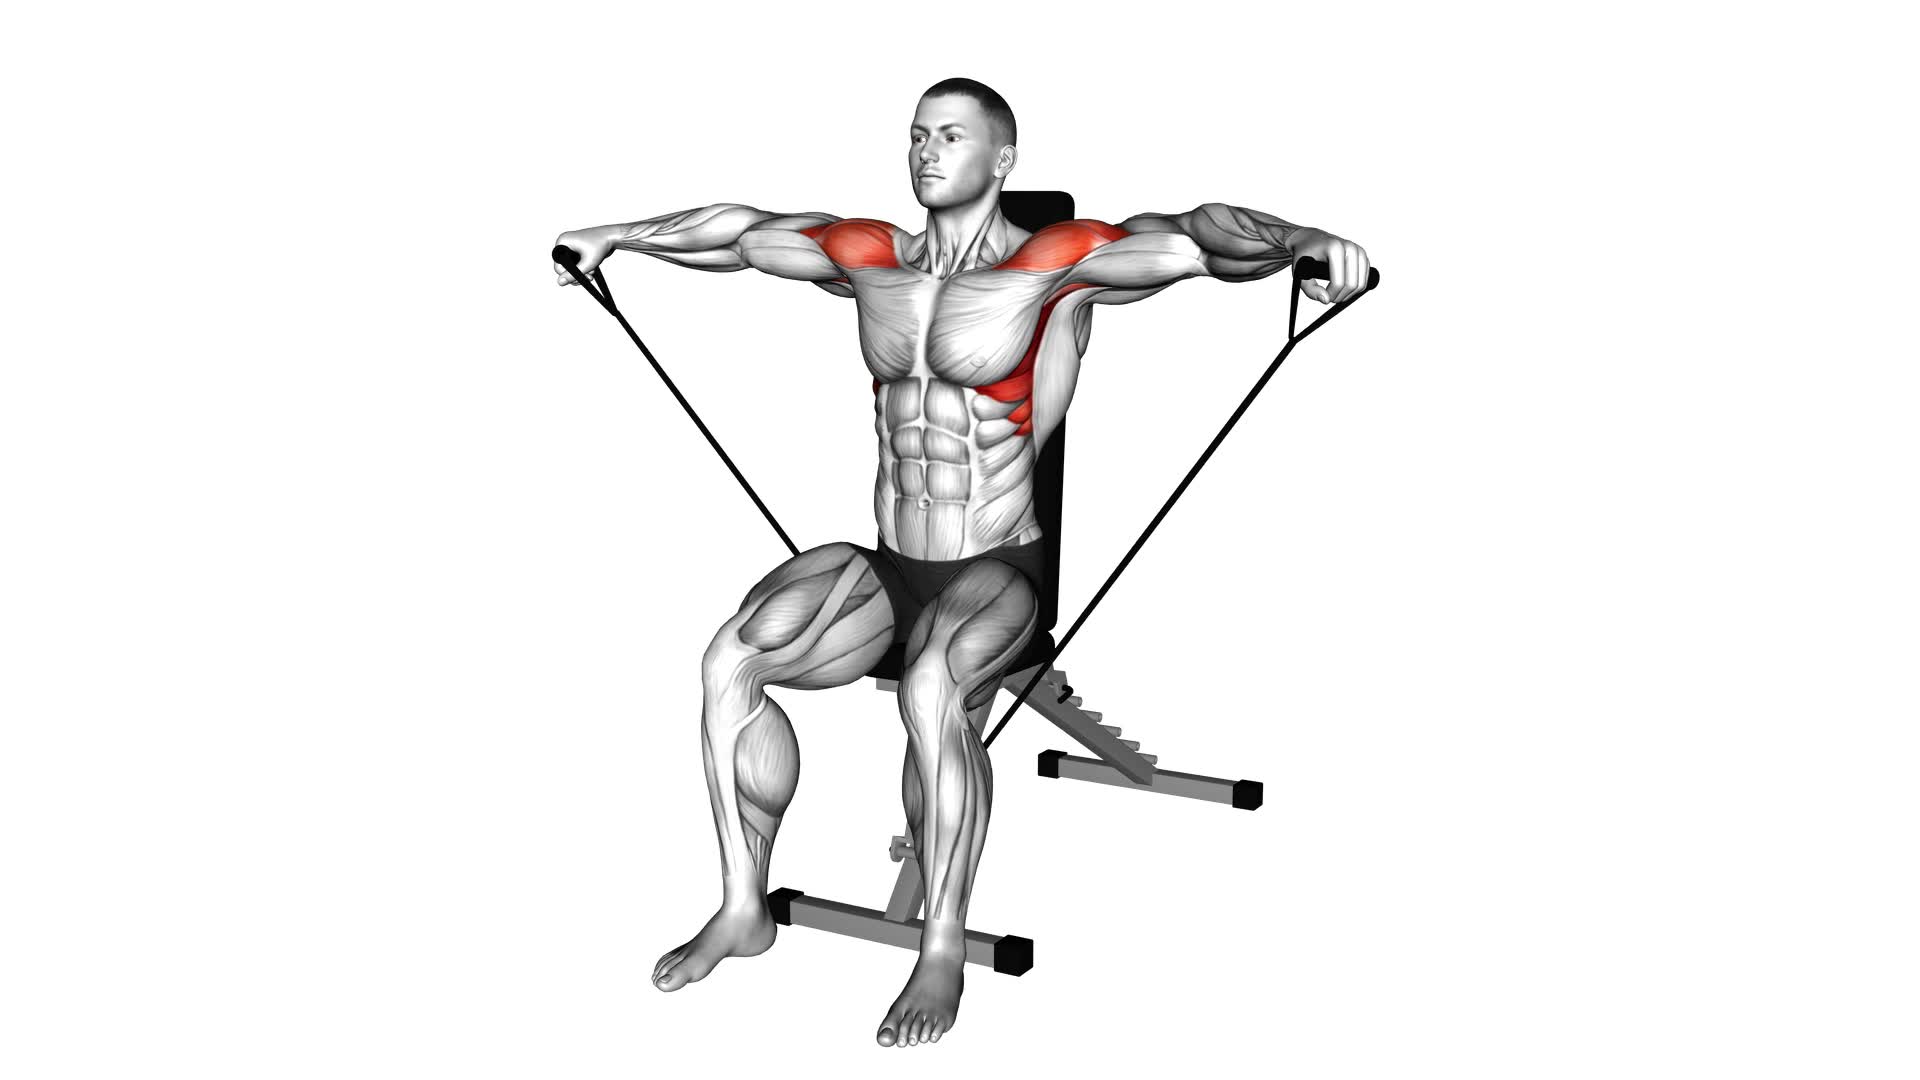 Band Seated Lateral Raise - Video Exercise Guide & Tips